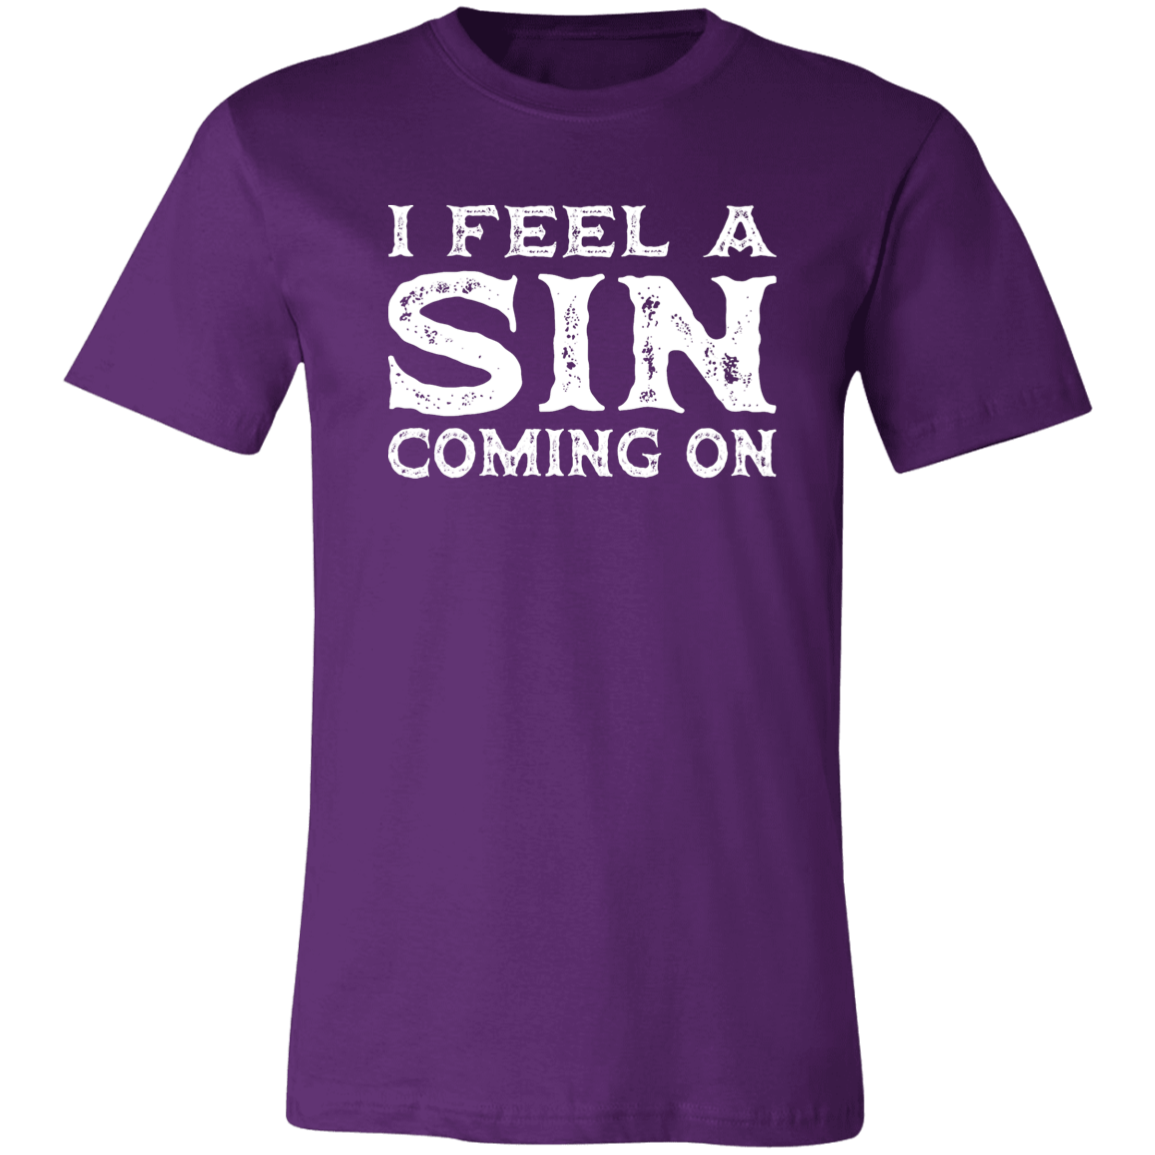 I Feel a SIN Coming On Jersey Short-Sleeve T-Shirt